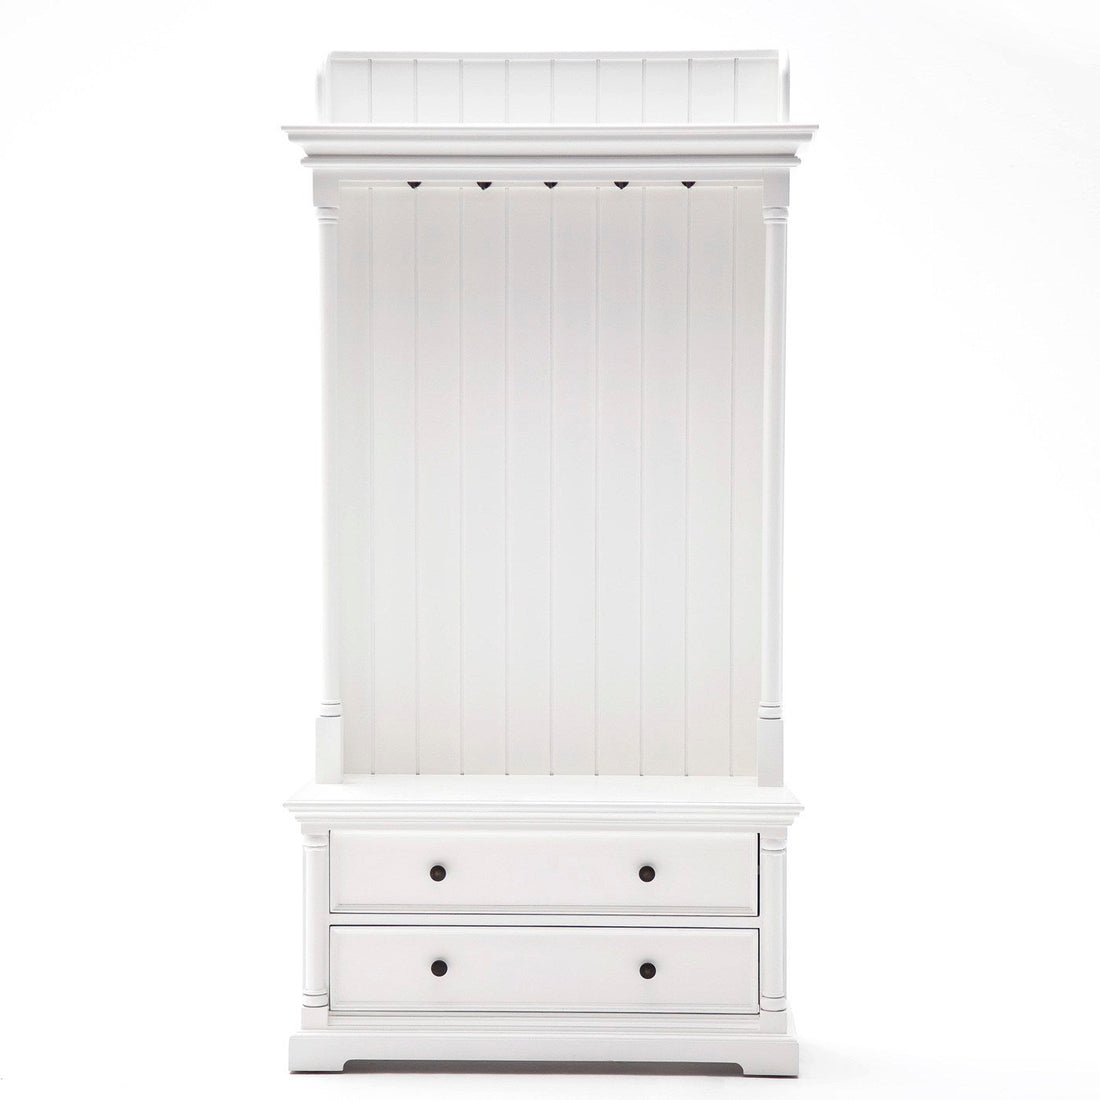 Provence entrance furniture with drawers